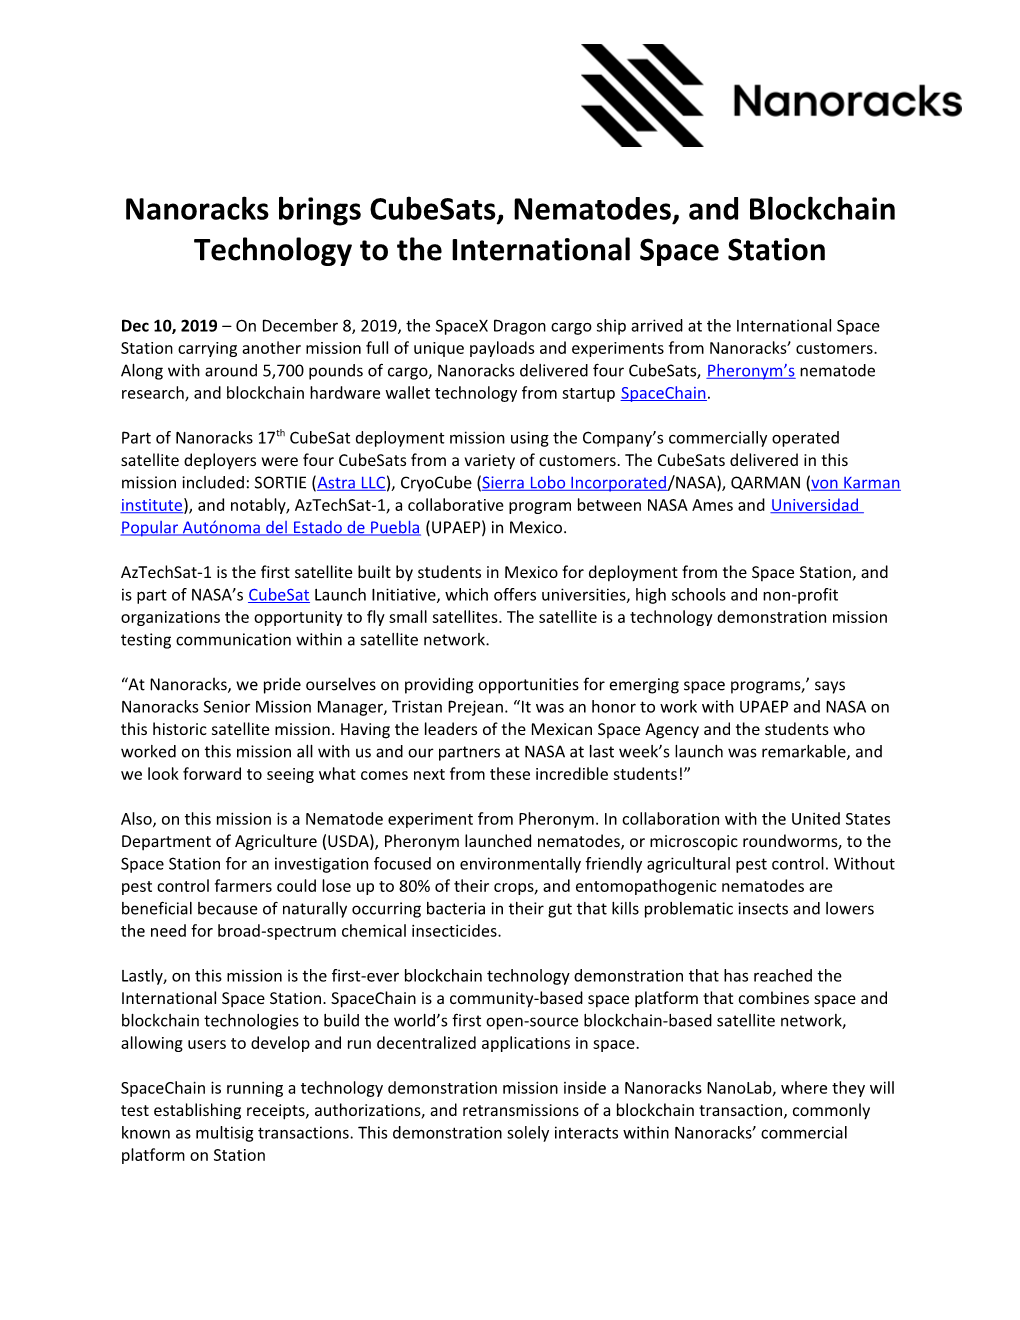 Nanoracks Brings Cubesats, Nematodes, and Blockchain Technology to the International Space Station